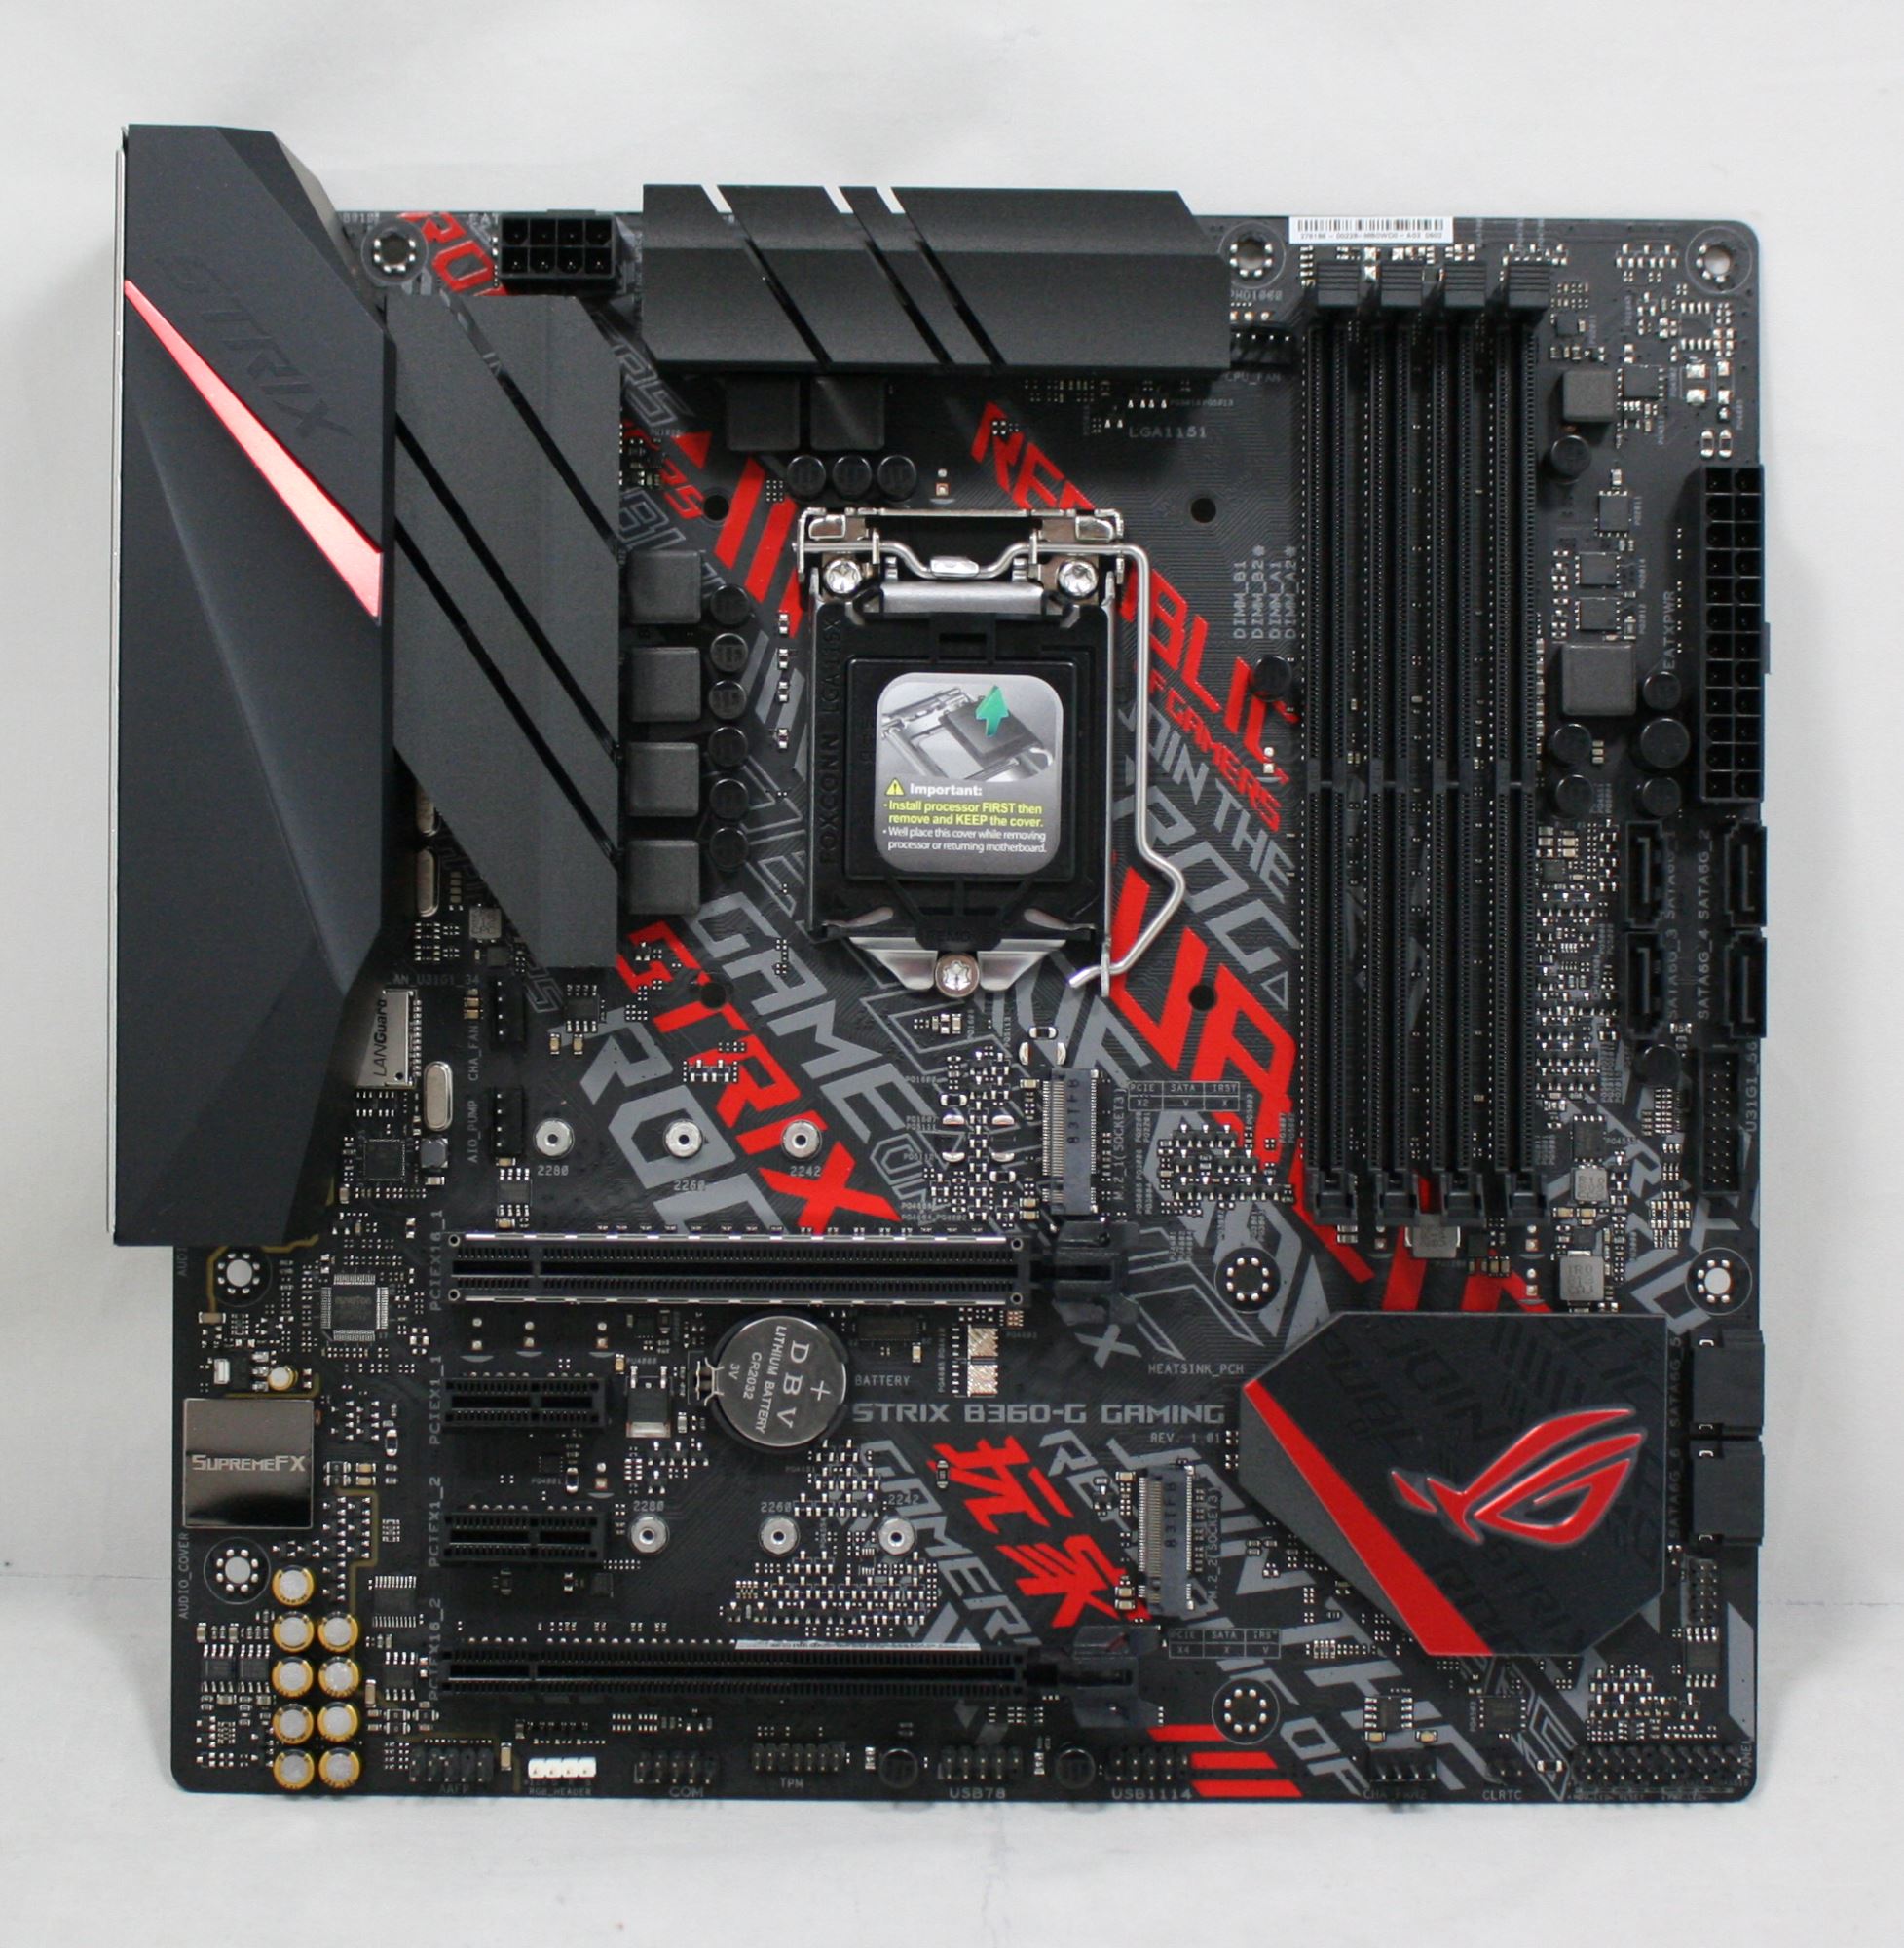 Gade Kabelbane underskud Visual Inspection - The ASUS ROG Strix B360-G Gaming Review: A Polarizing  $100 Motherboard Design